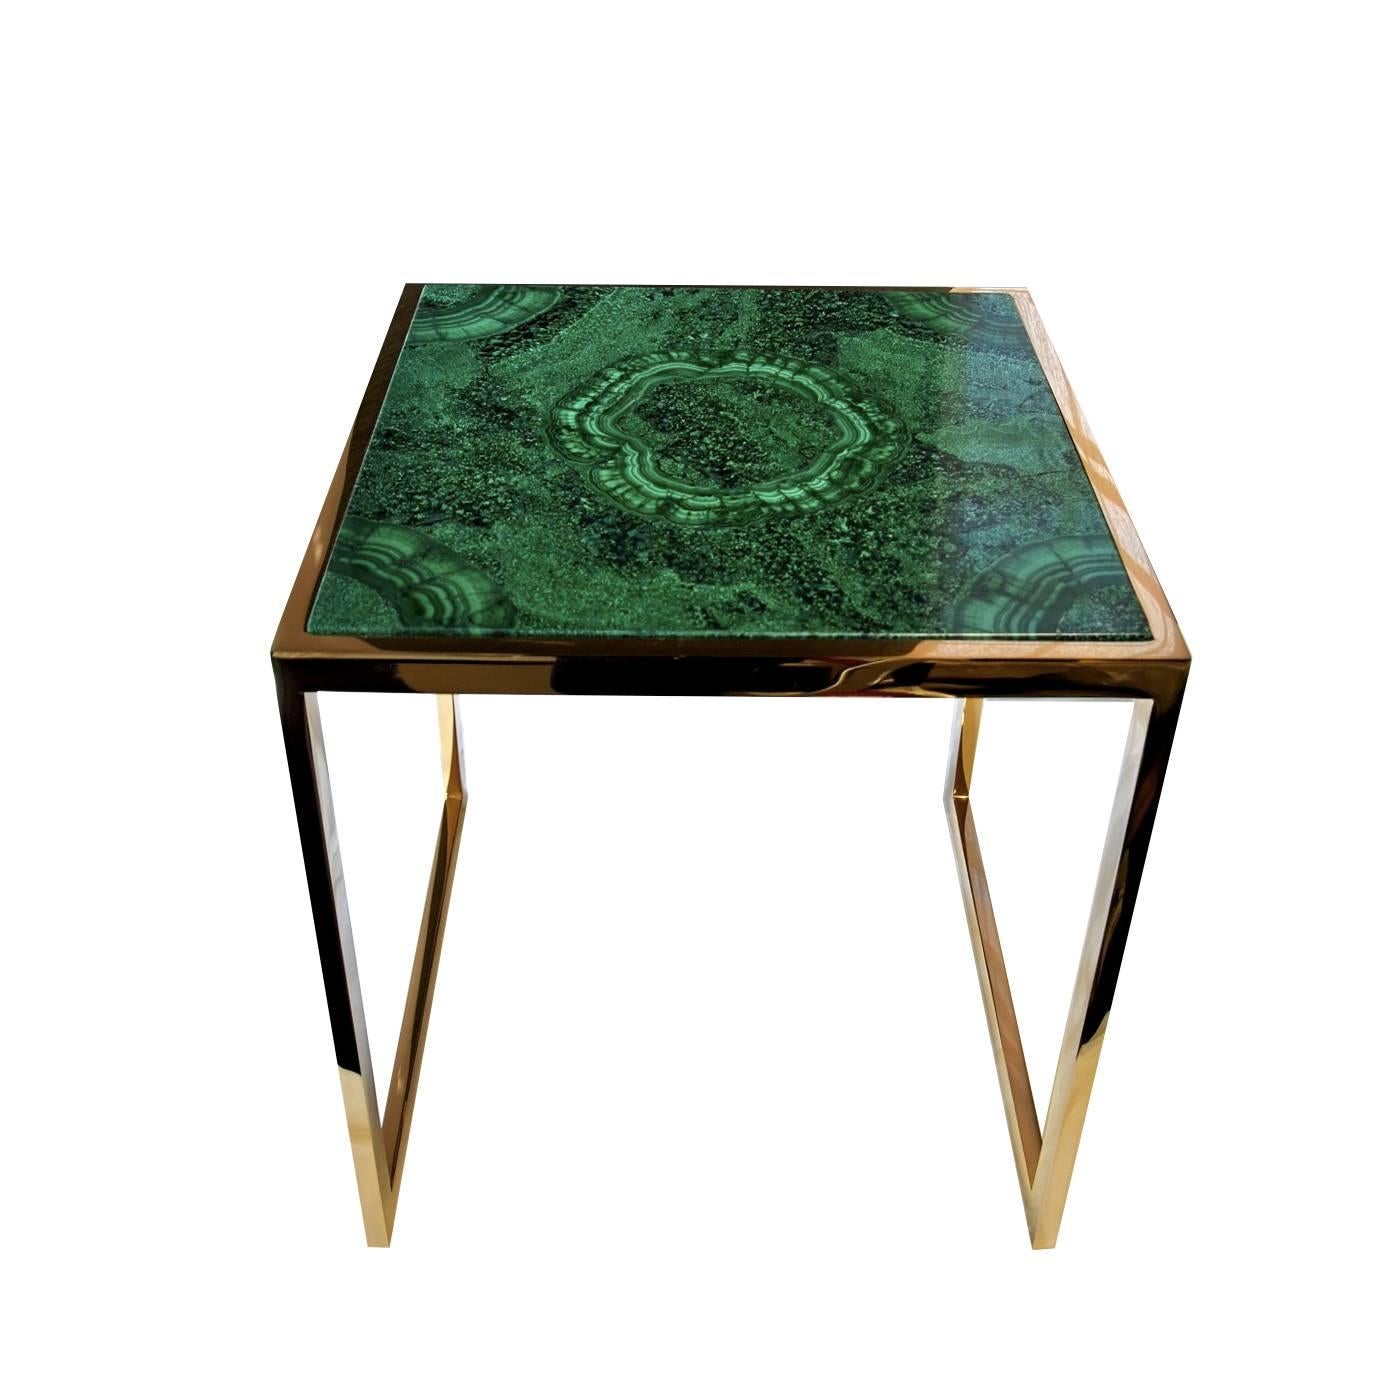 This side table appears small and delicate at first until the striking, natural hand-cut malachite top is observed. This striking stone features a variety of striations in shades of green, spanning from light to dark and everywhere in between. The